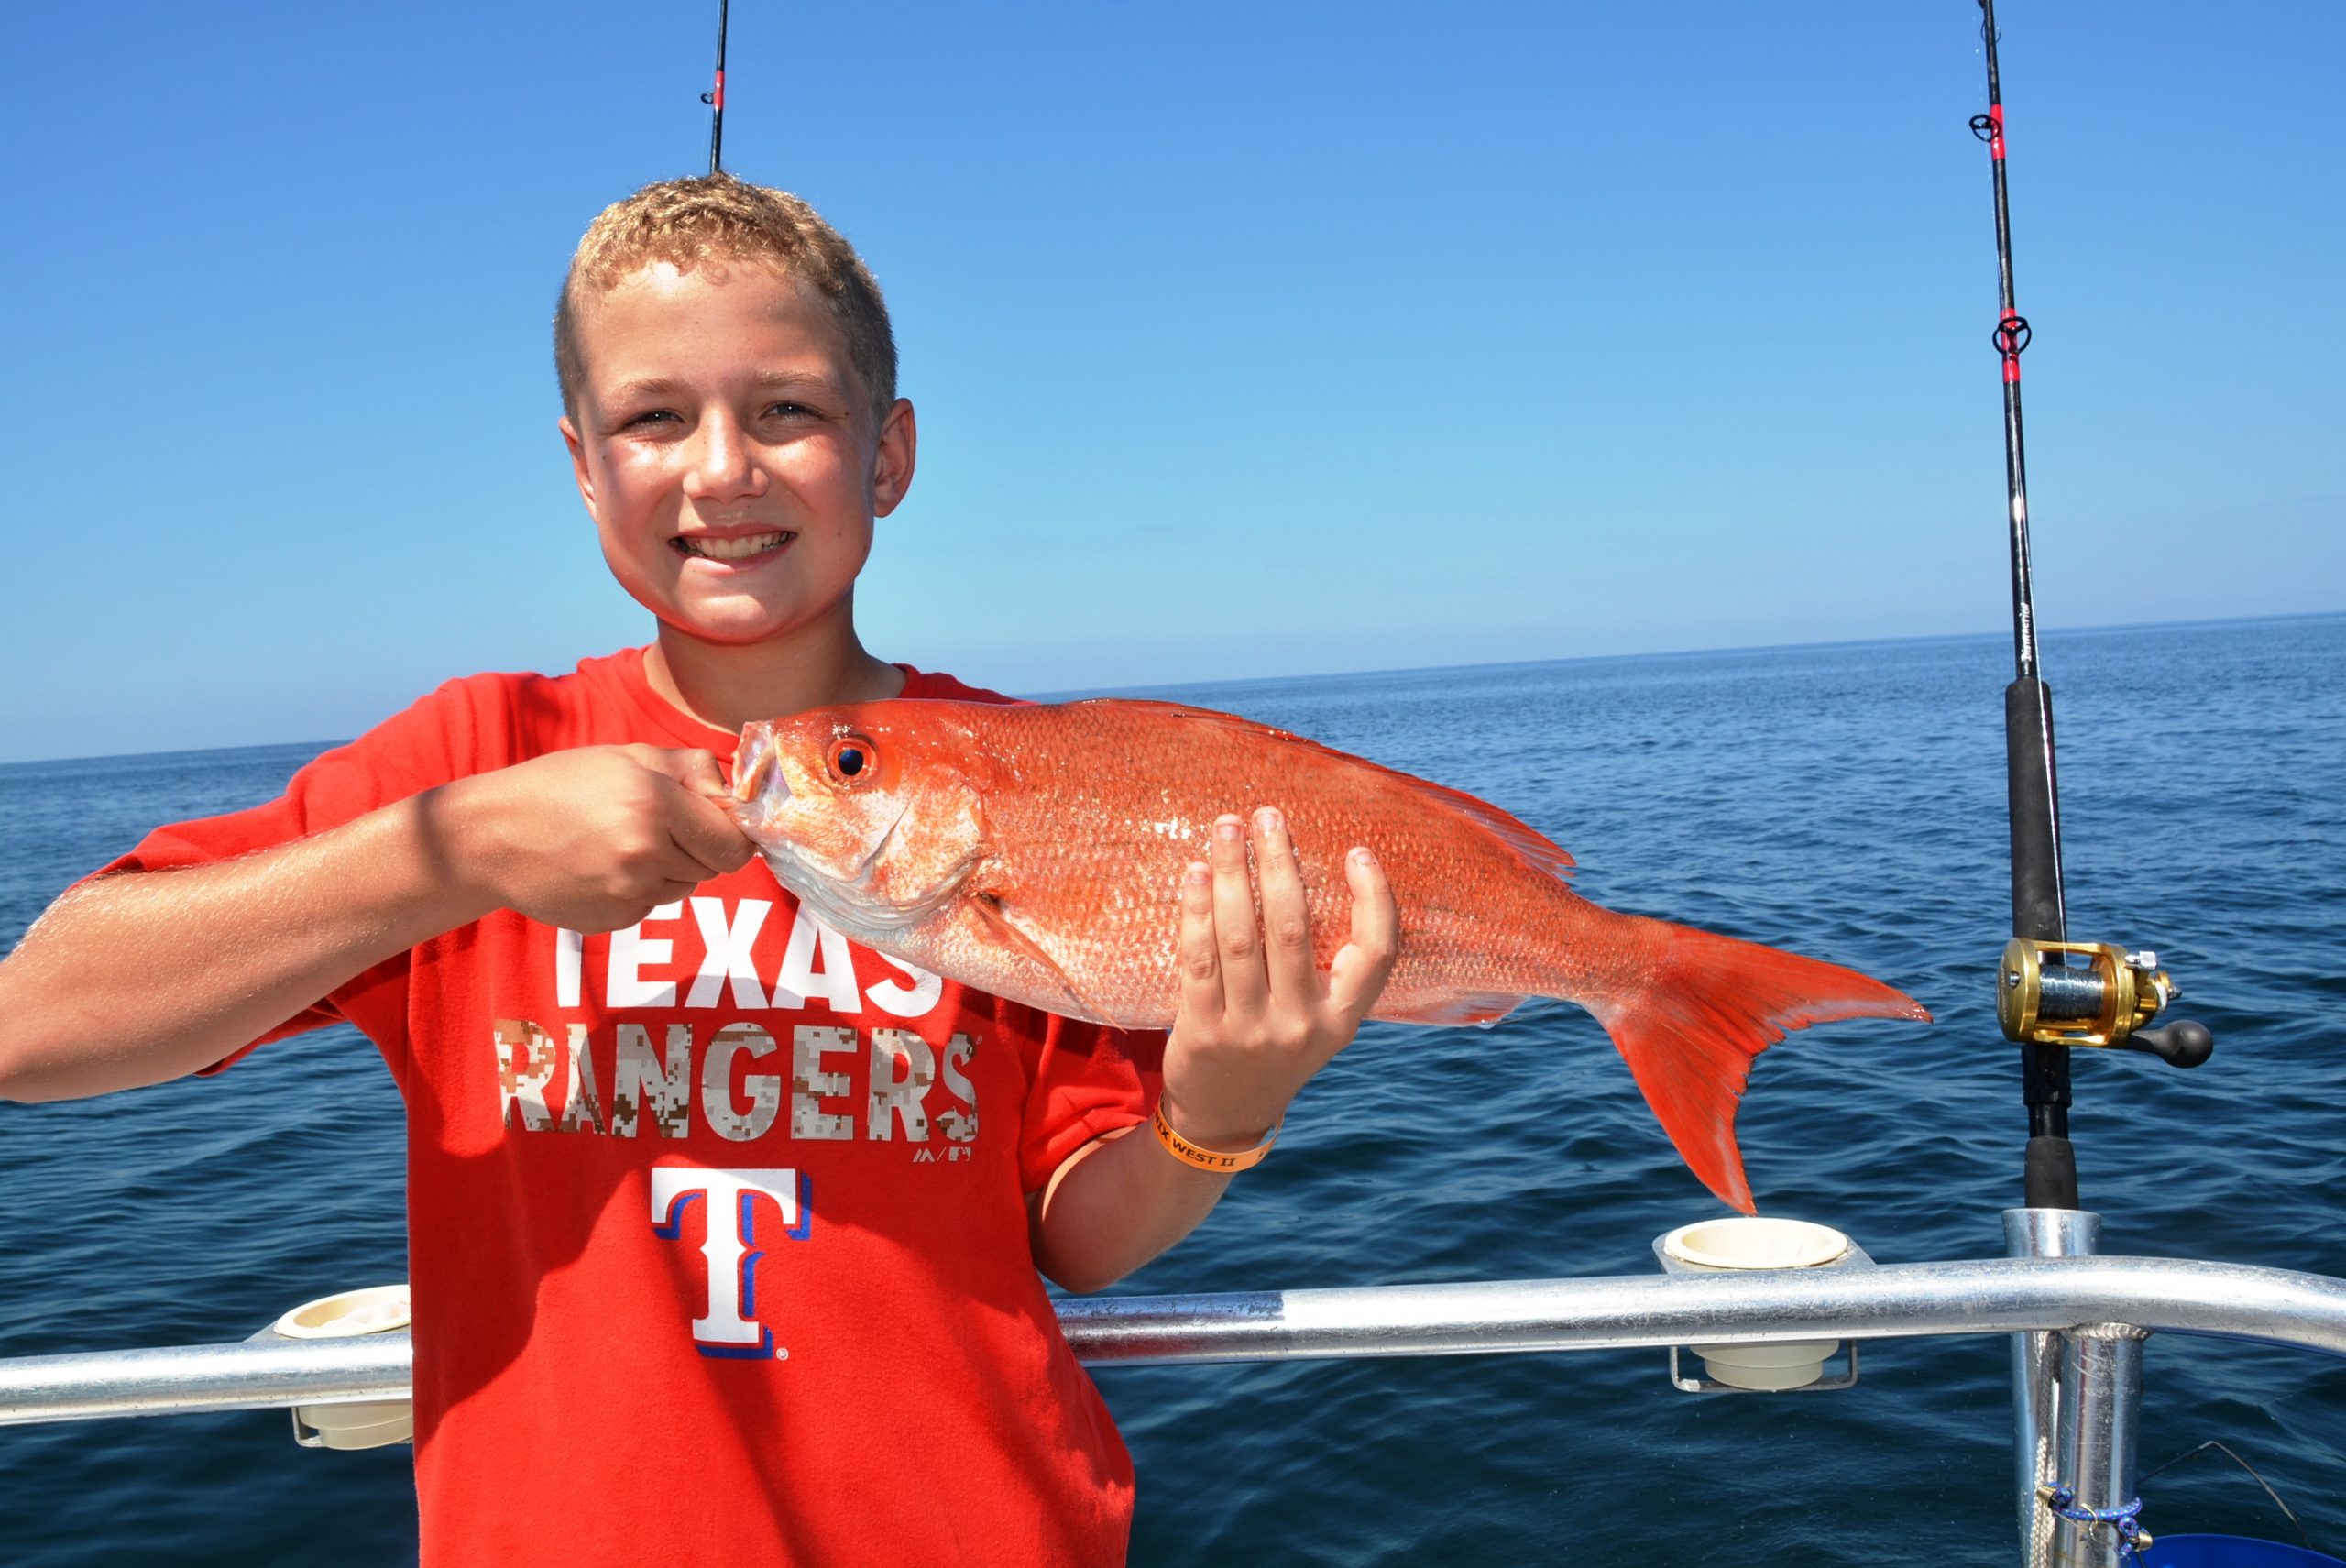 6 Hour Deep Sea Fishing Charters are the best trips we offer.